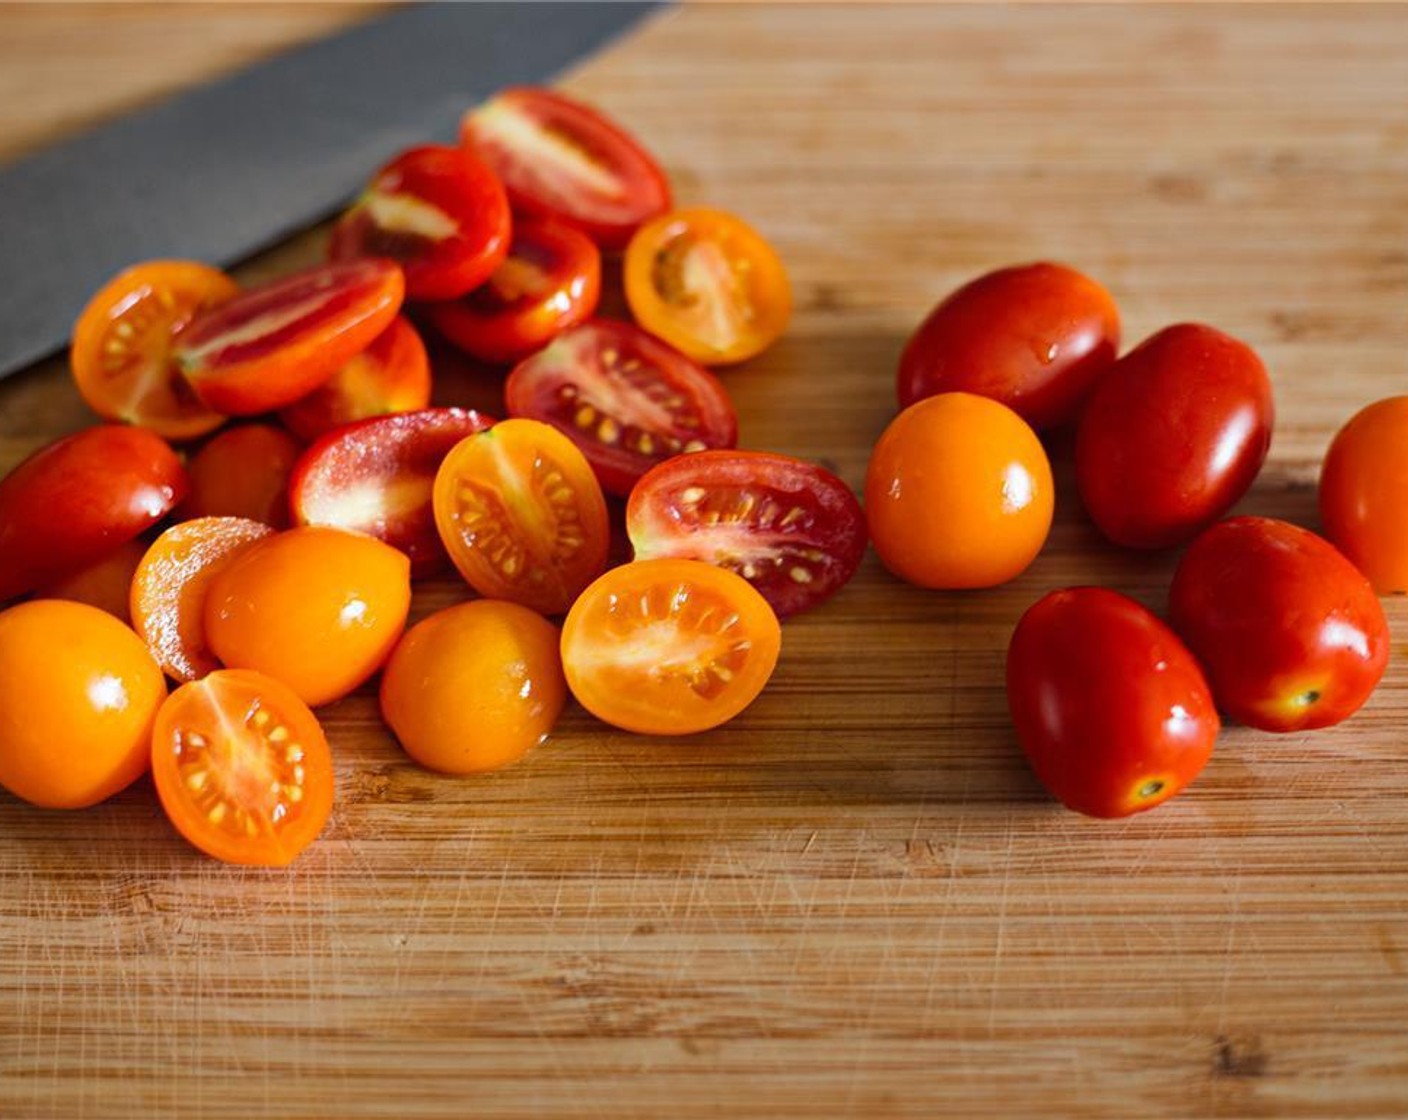 step 6 While your maize meal is cooking, get started on the relish by halving Cherry Tomatoes (4 cups).